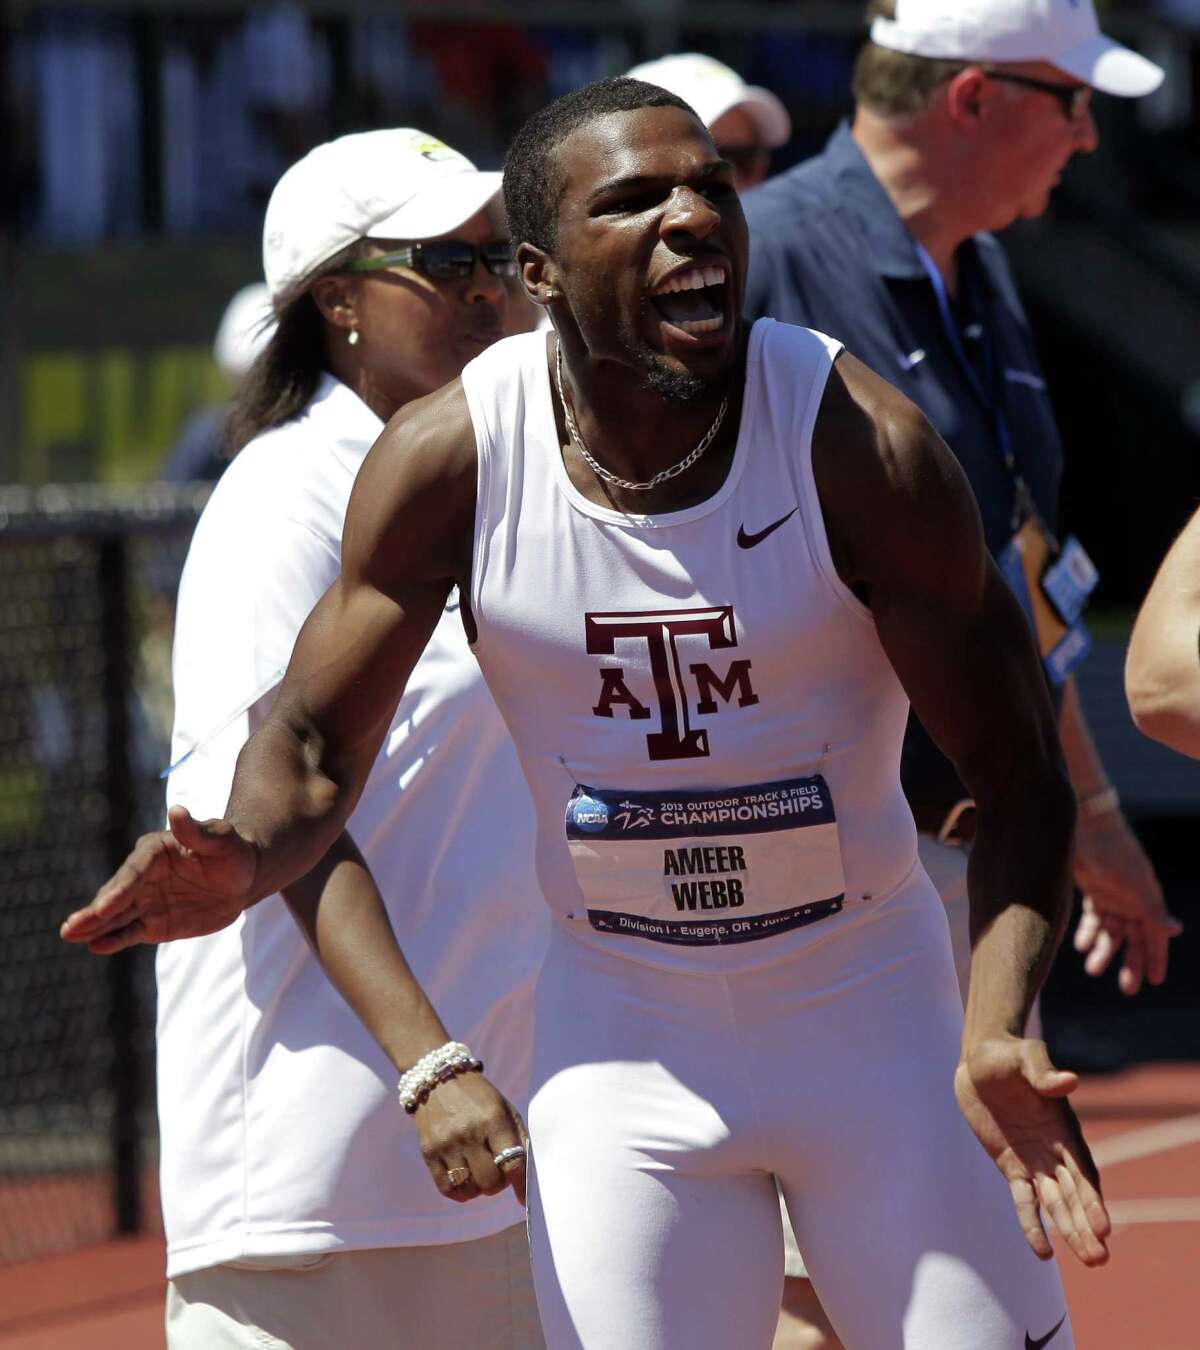 Ameer Webb celebrates his 200-meter victory as the Aggies tied with conference rival Florida for the men's national championship.